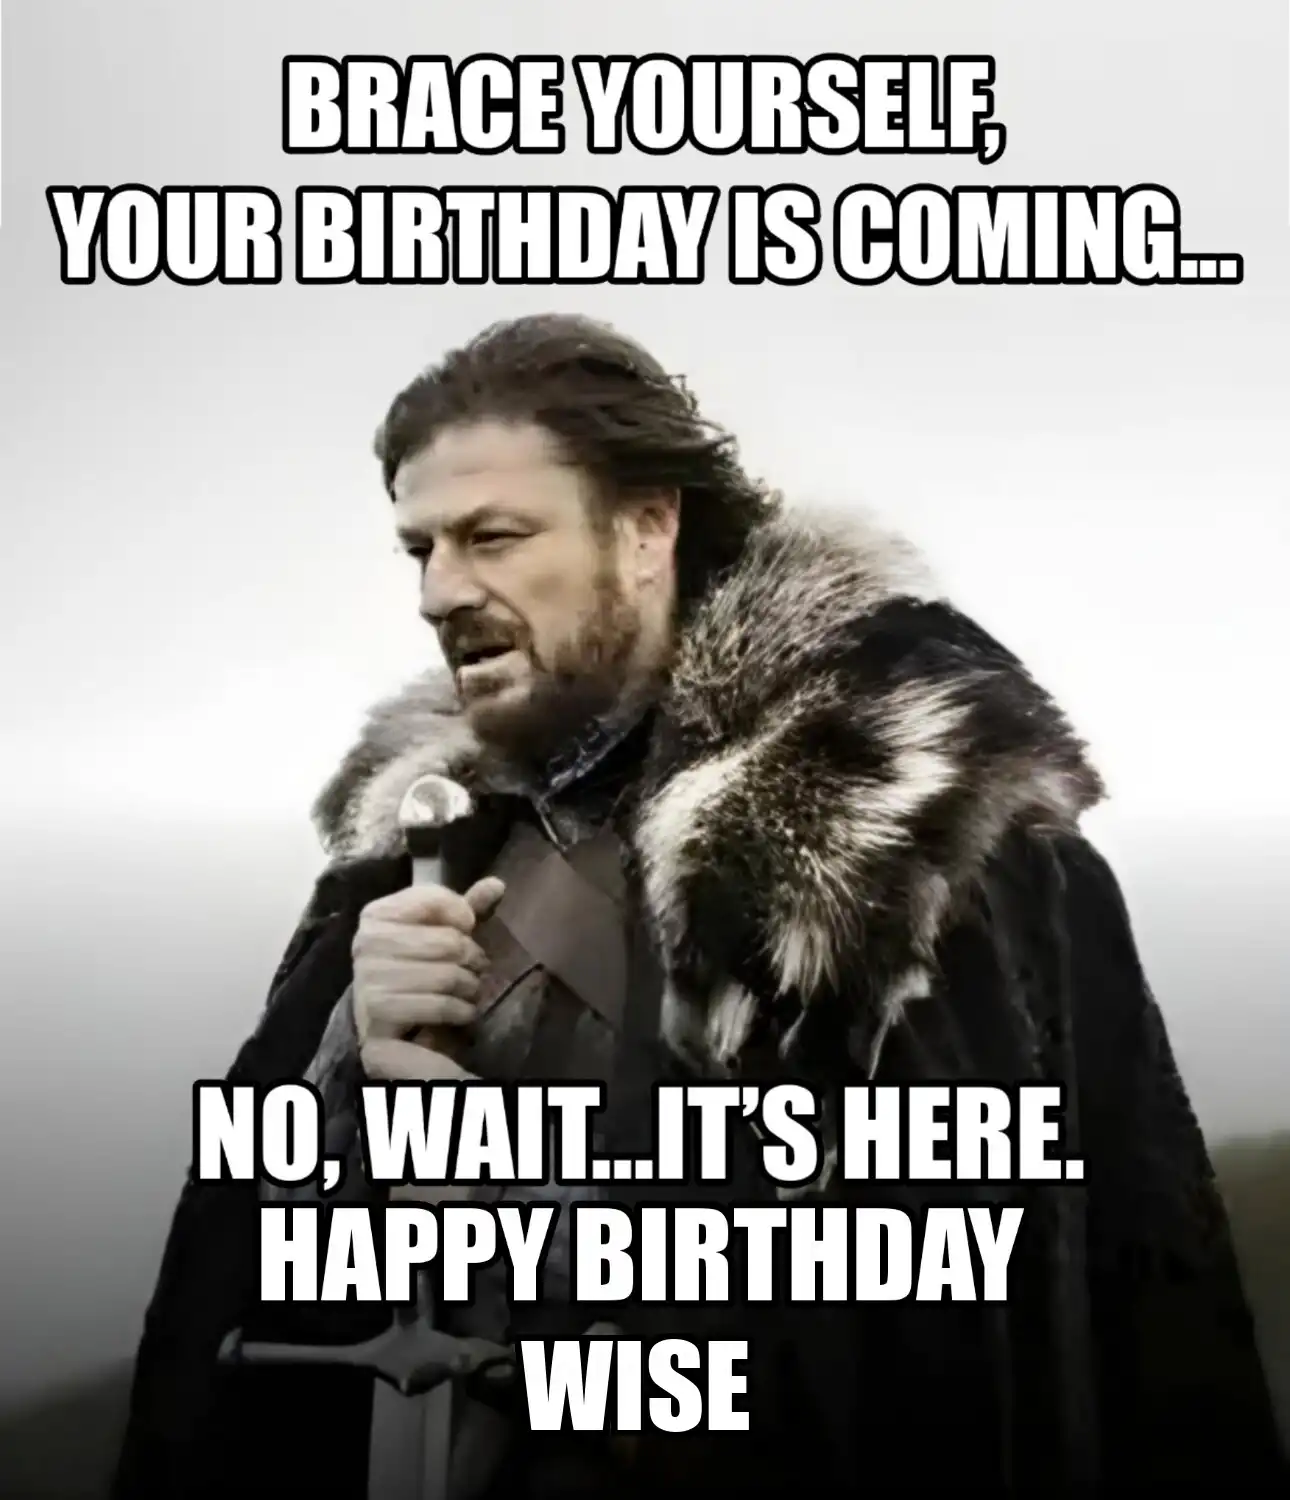 Happy Birthday Wise Brace Yourself Your Birthday Is Coming Meme